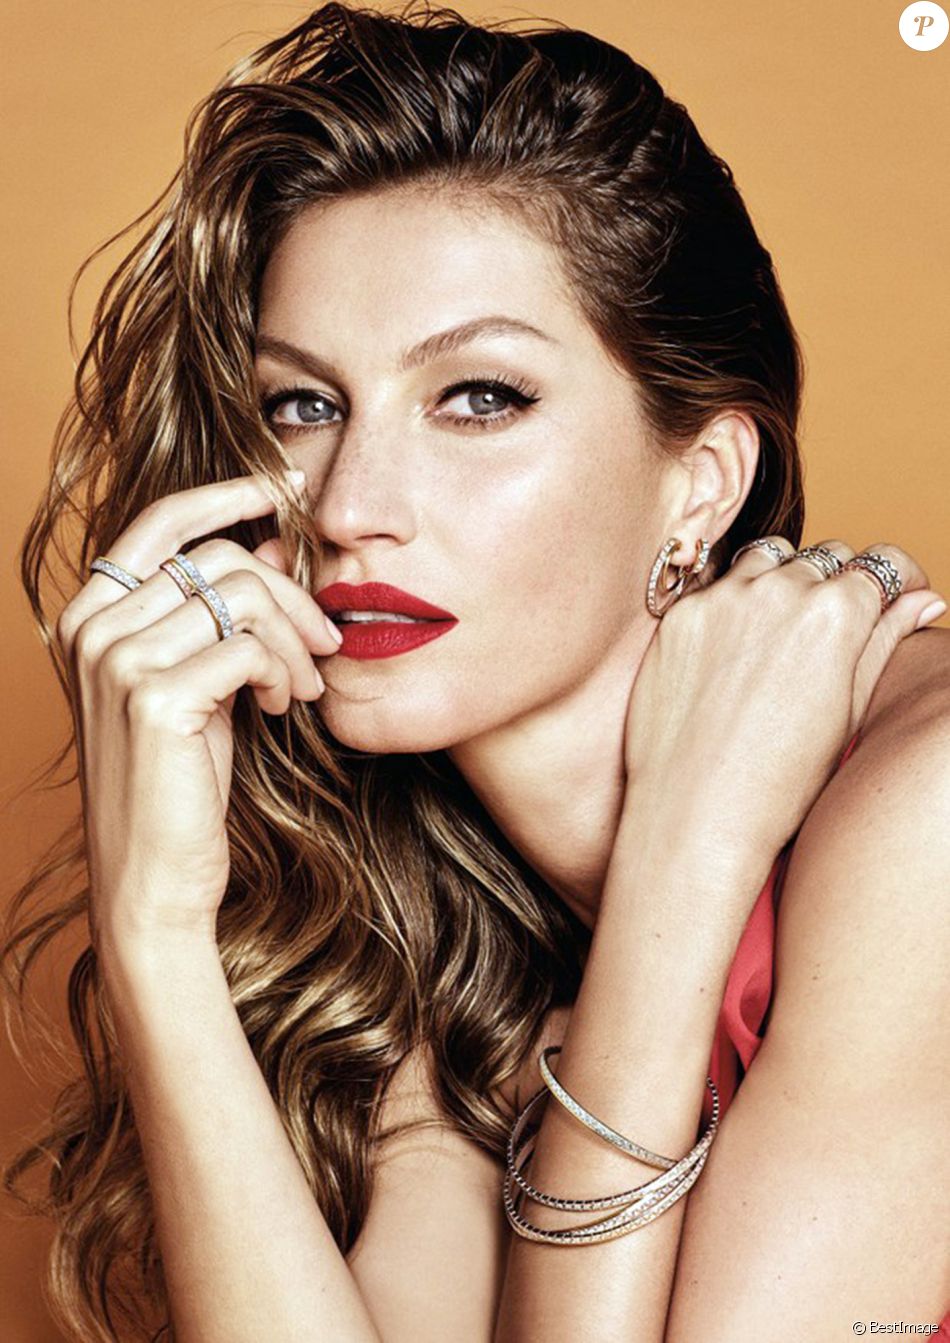 Gisele Bundchen pose pour la campagne de Noël du bijoutier brésilien Vivara  Celebrating the holiday season, Brazilian jewelry brand Vivara taps Gisele Bundchen for its Christmas 2018 campaign. The supermodel shows off her famous figure while covered up with red fabric and little else. Gisele wears gold and silver jewelry in sleek silhouettes.29/11/2018 - Sao Paulo